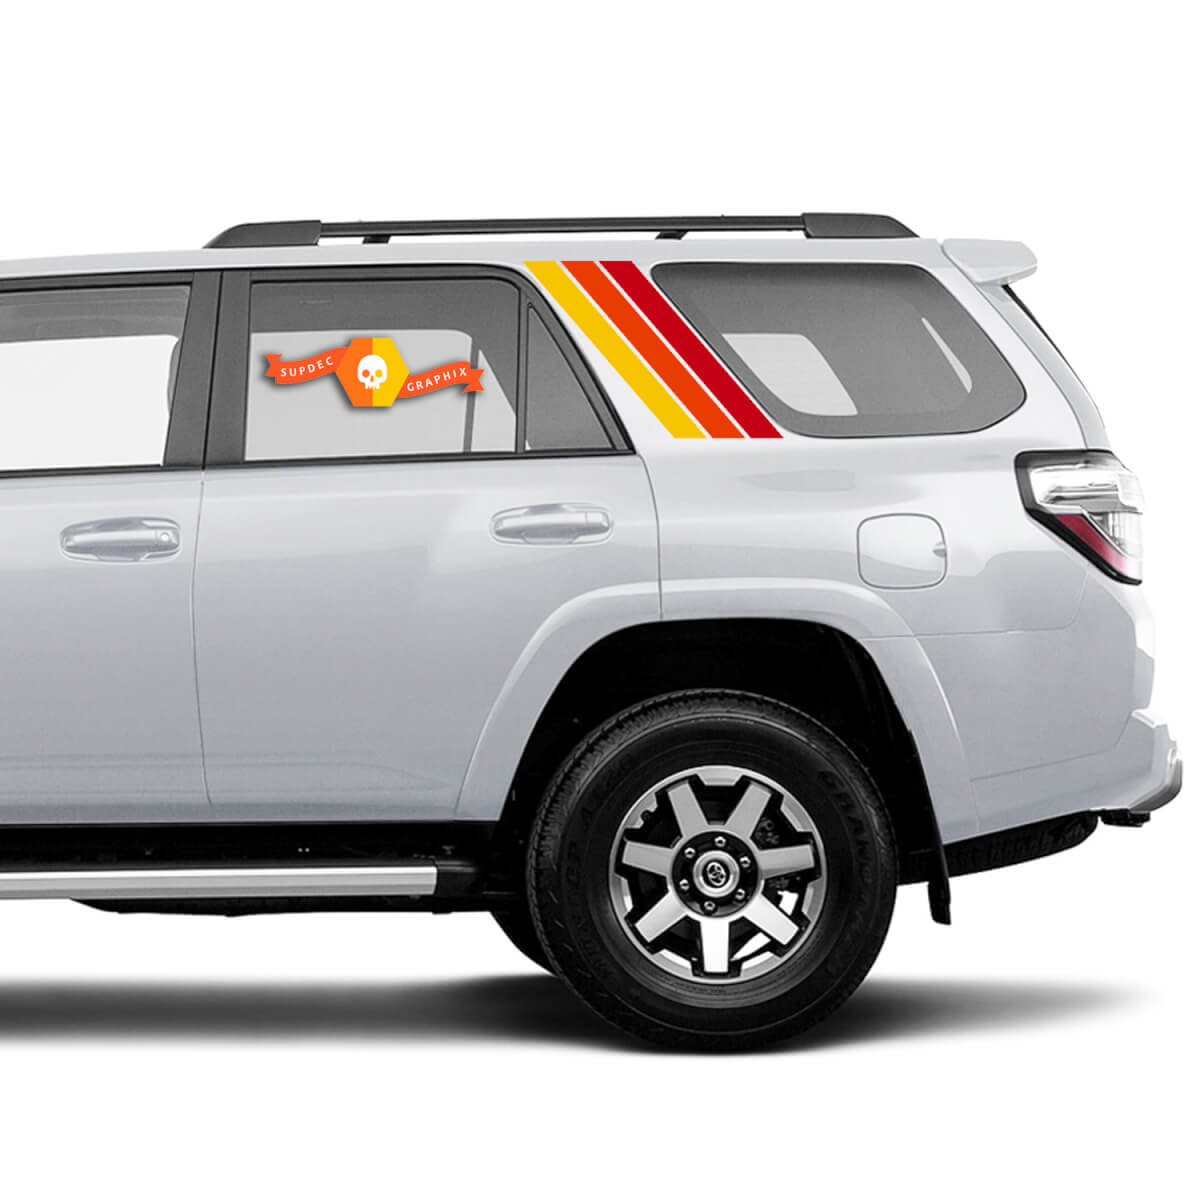 Pair of Three Colors old School 4Runner Stripes Side Vinyl Decals Stickers for Toyota 4Runner -Three Exterior Colors